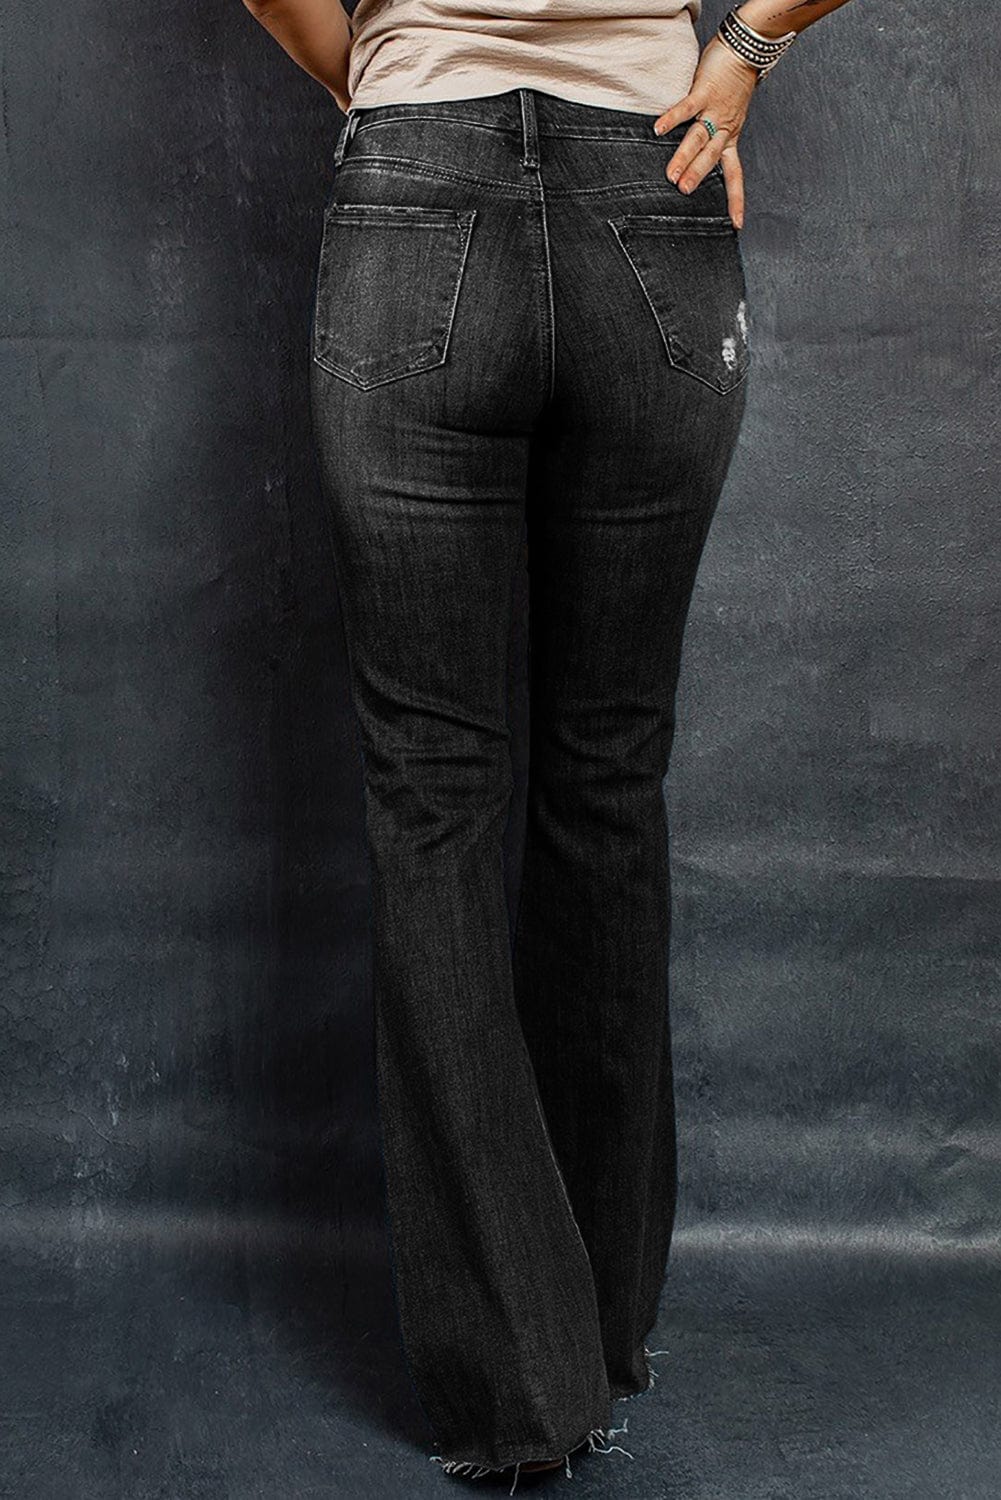 The802Gypsy Bottoms Gypsy Daisy Distressed Flare Jeans